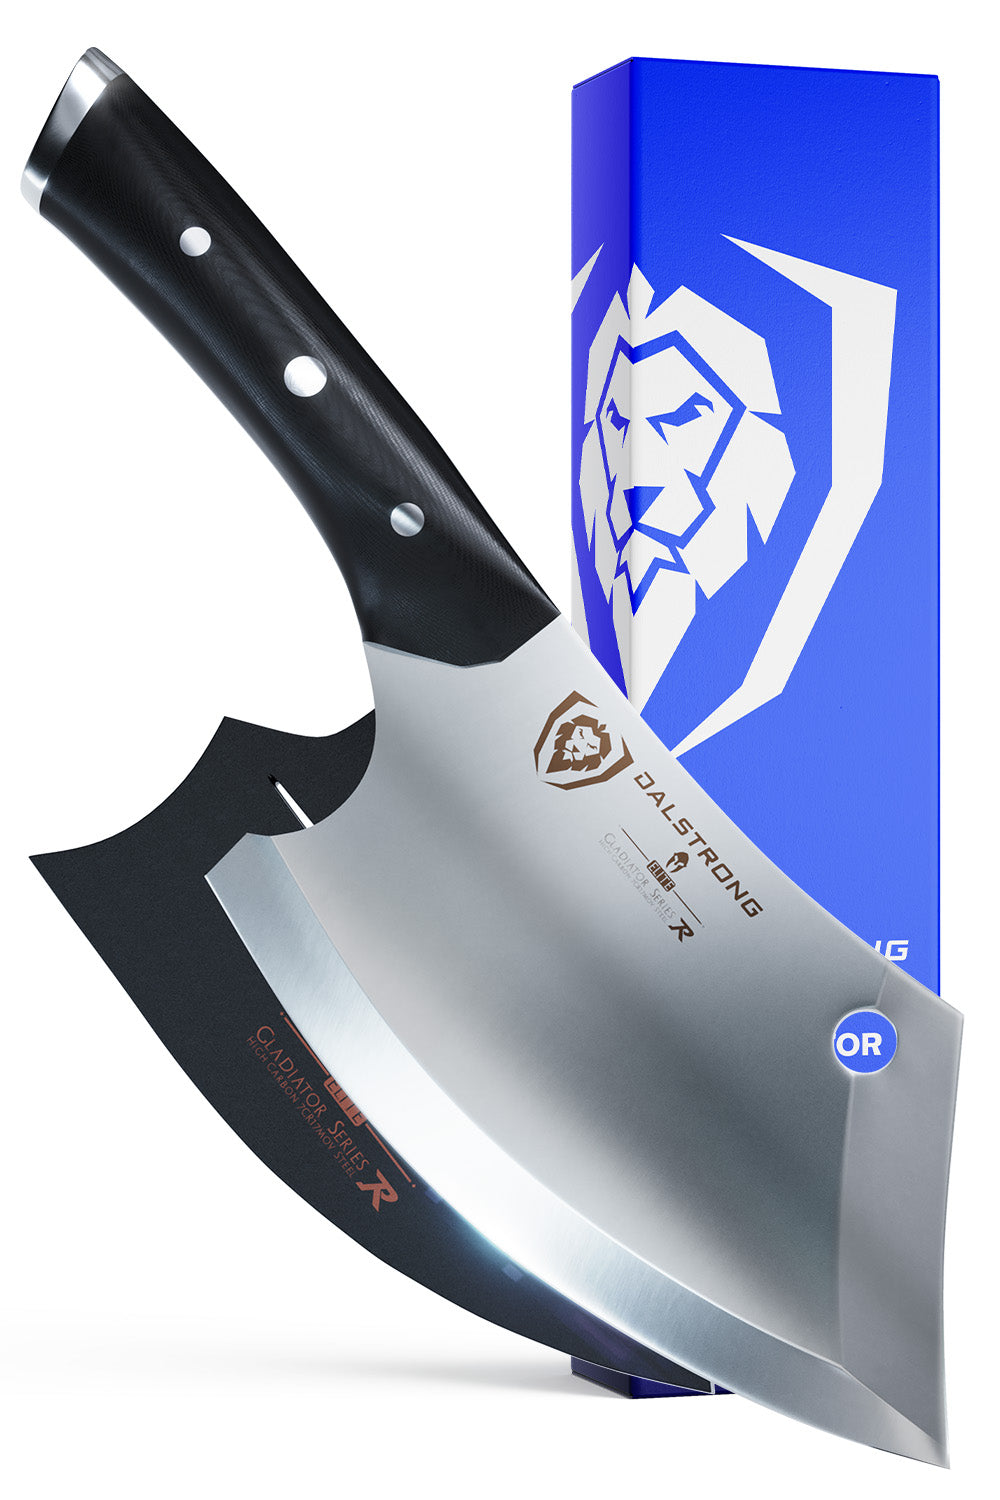 Mini Rocking Cleaver Knife 6.5" | Gladiator Series | NSF Certified | Dalstrong ©